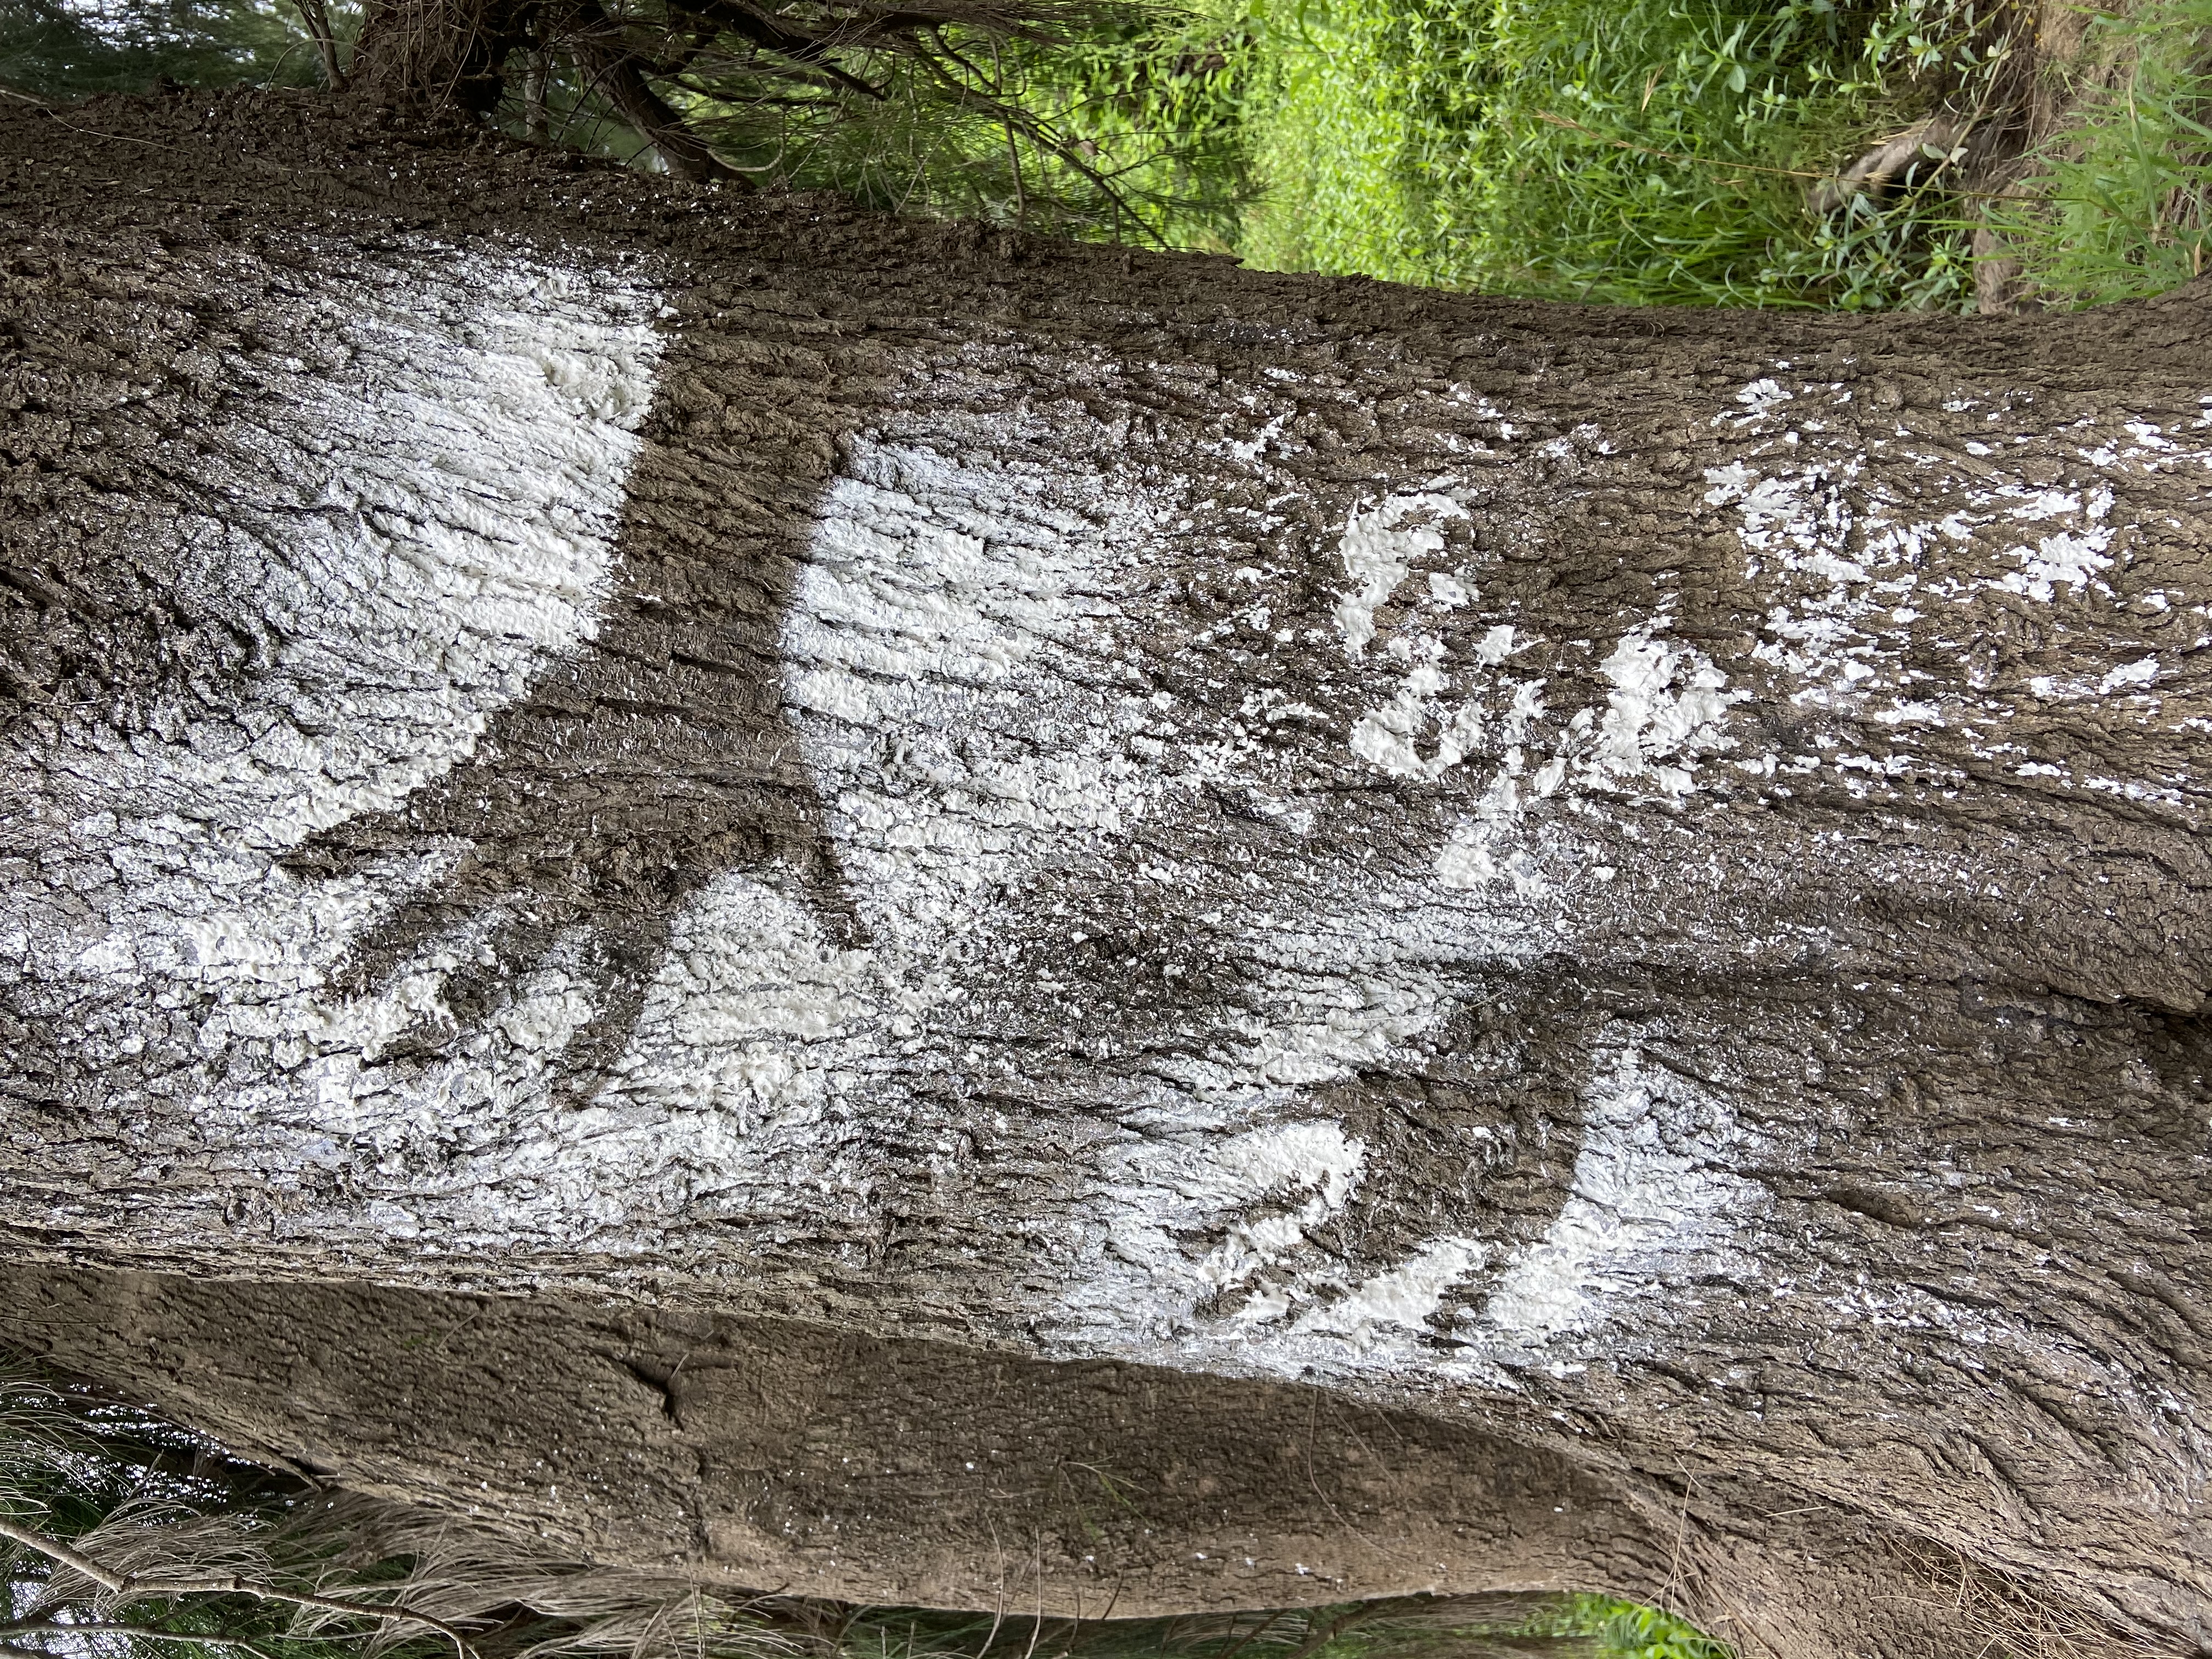 Stencilled hand prints on a casuarina tree (gumin) at Shaws Creek Aboriginal Place, photograph by Avryl Whitnall, 2020